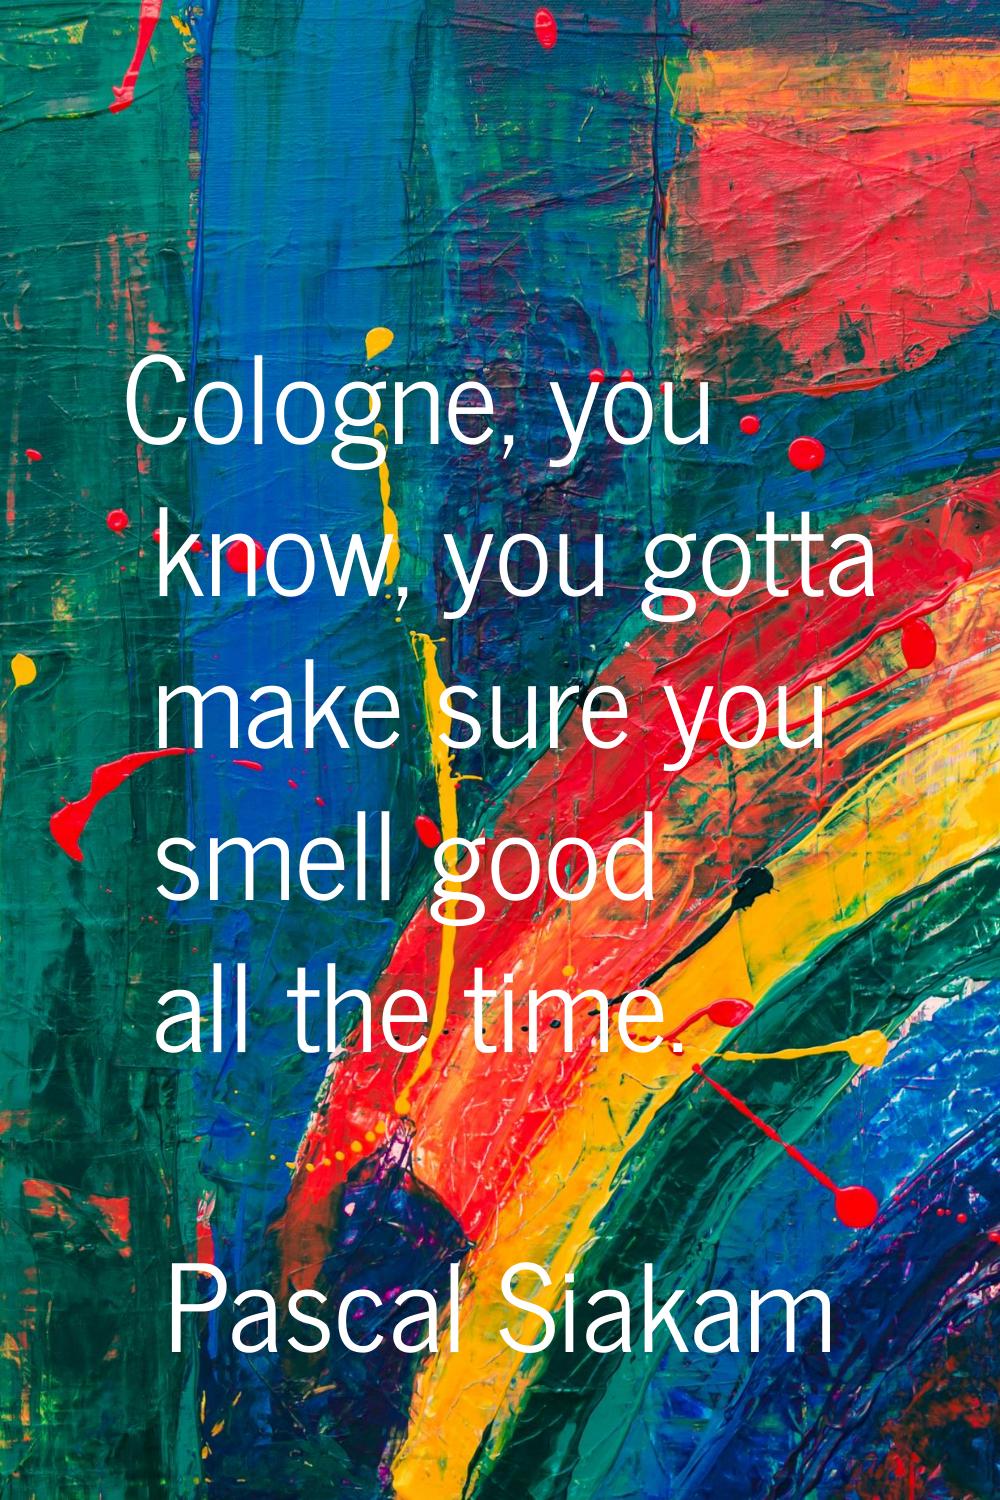 Cologne, you know, you gotta make sure you smell good all the time.